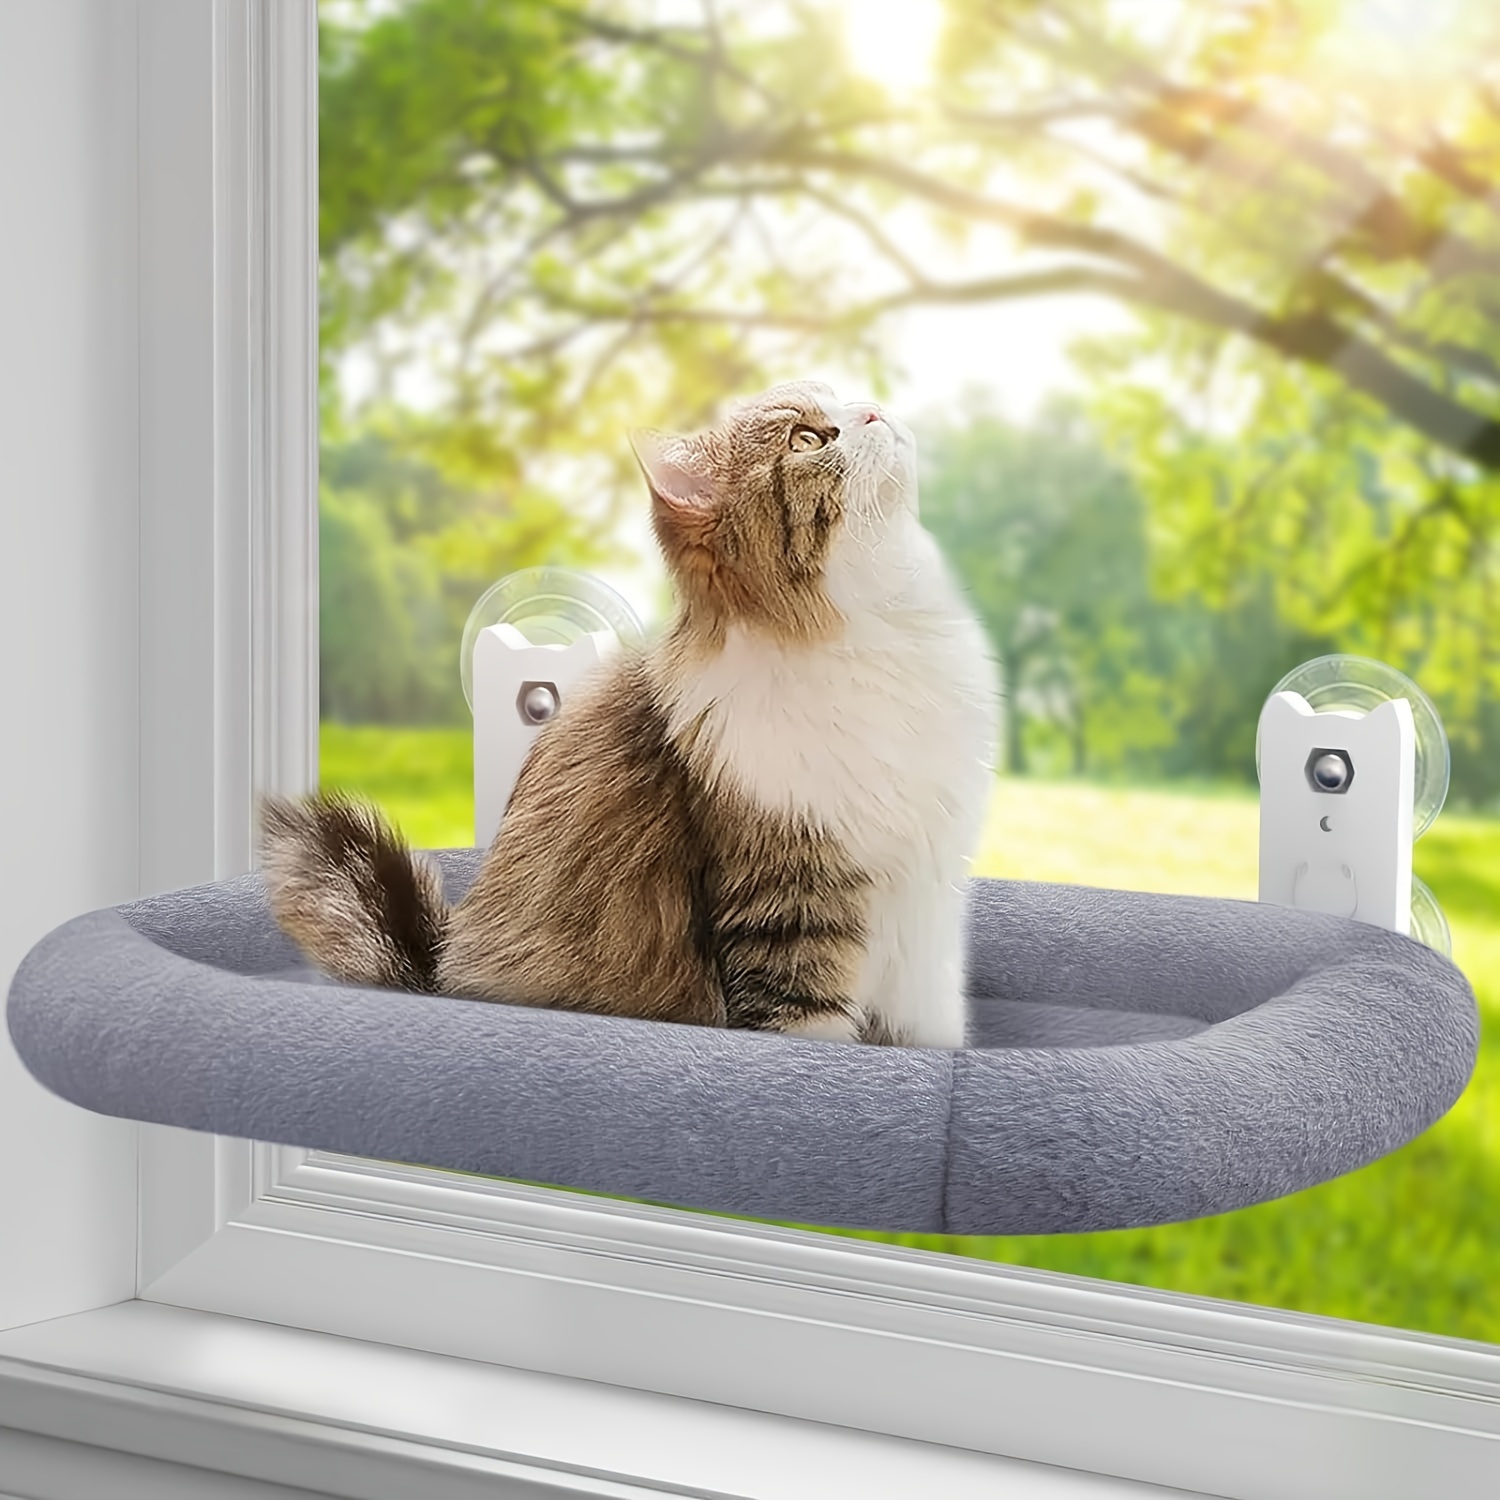 

Detachable Polyester Cat Hammock With Suction Cups - Hanging Pet Bed For Cats Of All Ages - Comfortable And Space-saving Window Perch